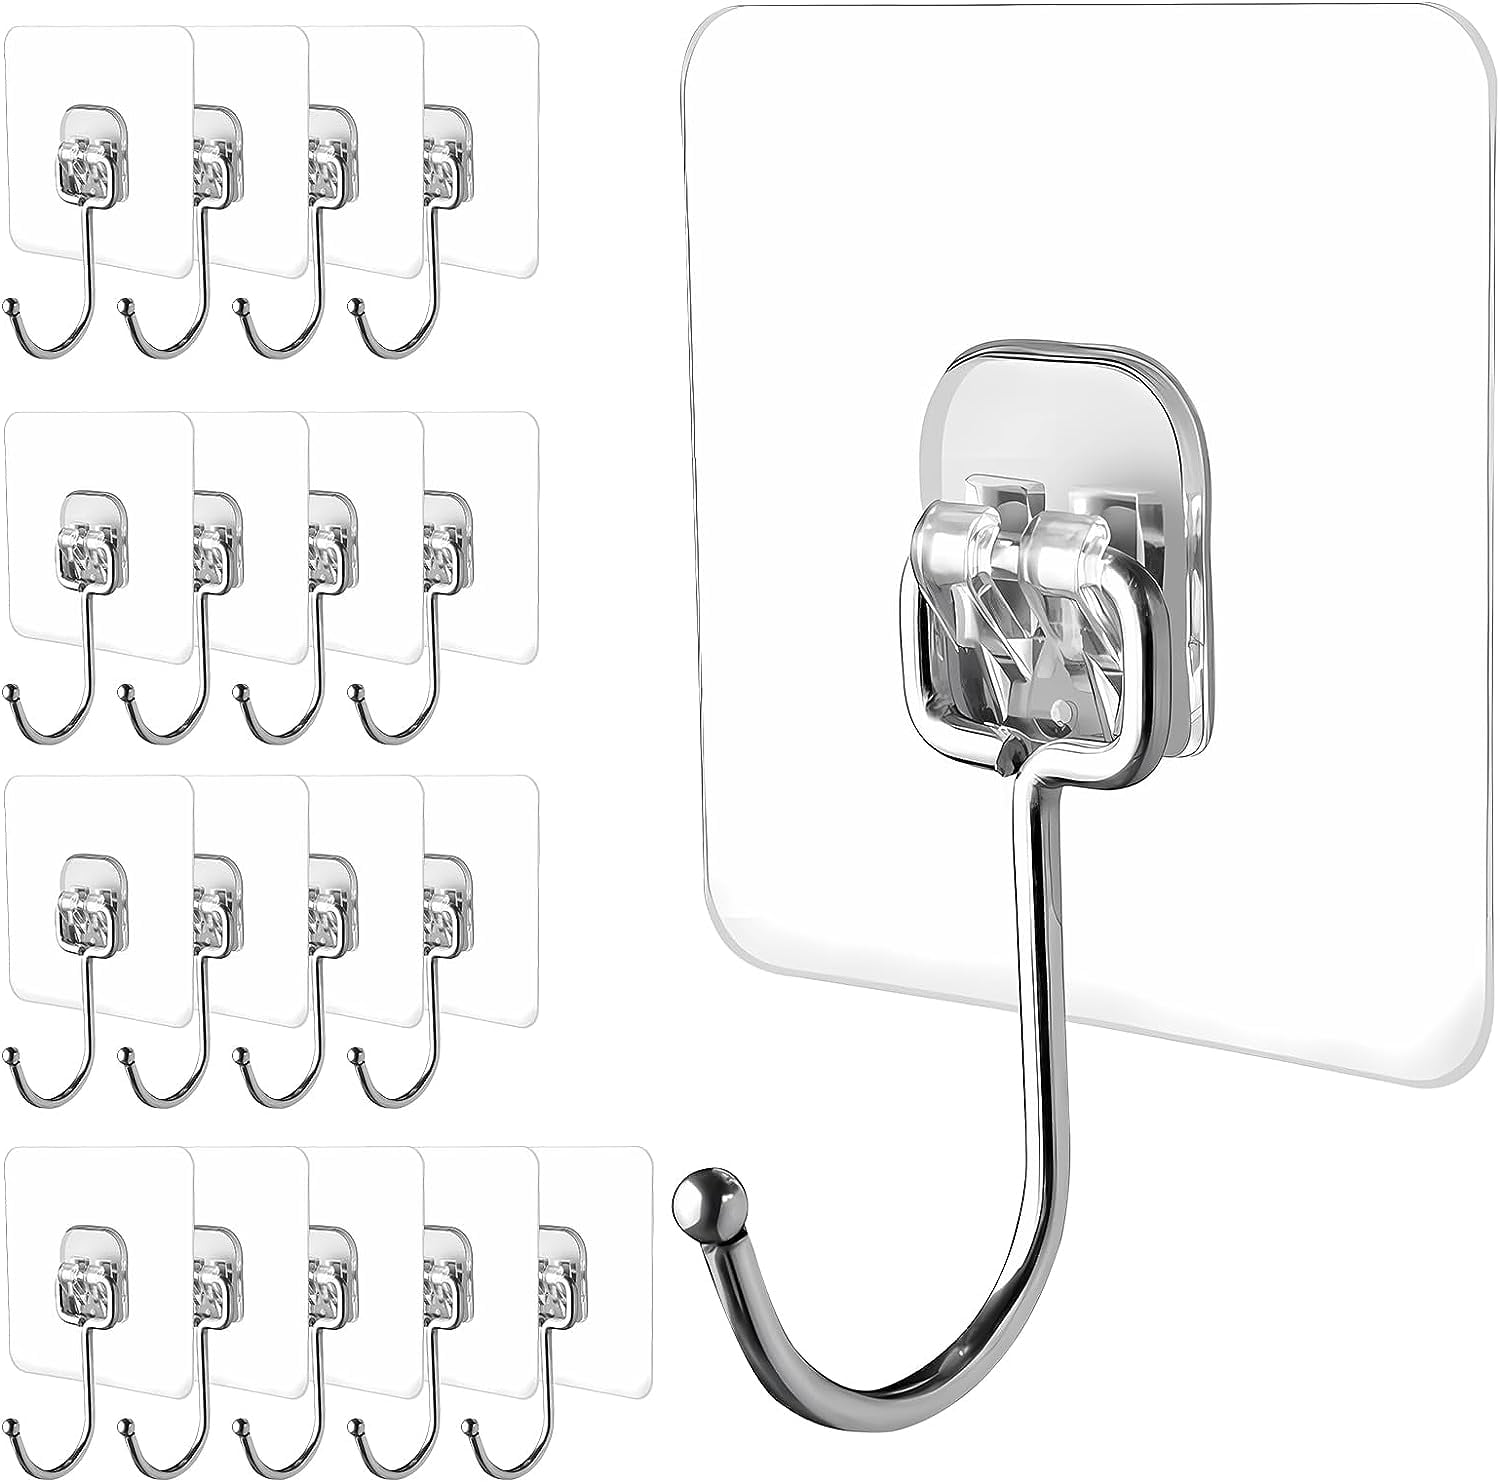 DADHOT Large Adhesive Hooks, 18-Pack Hold 44lb(Max) Heavy Duty Sticky Hooks,Waterproof  and Rustproof Wall Hooks for Hanging Can Be Use Kitchen Bathroom Outdoor  Ceiling Office Window Home Improvement 